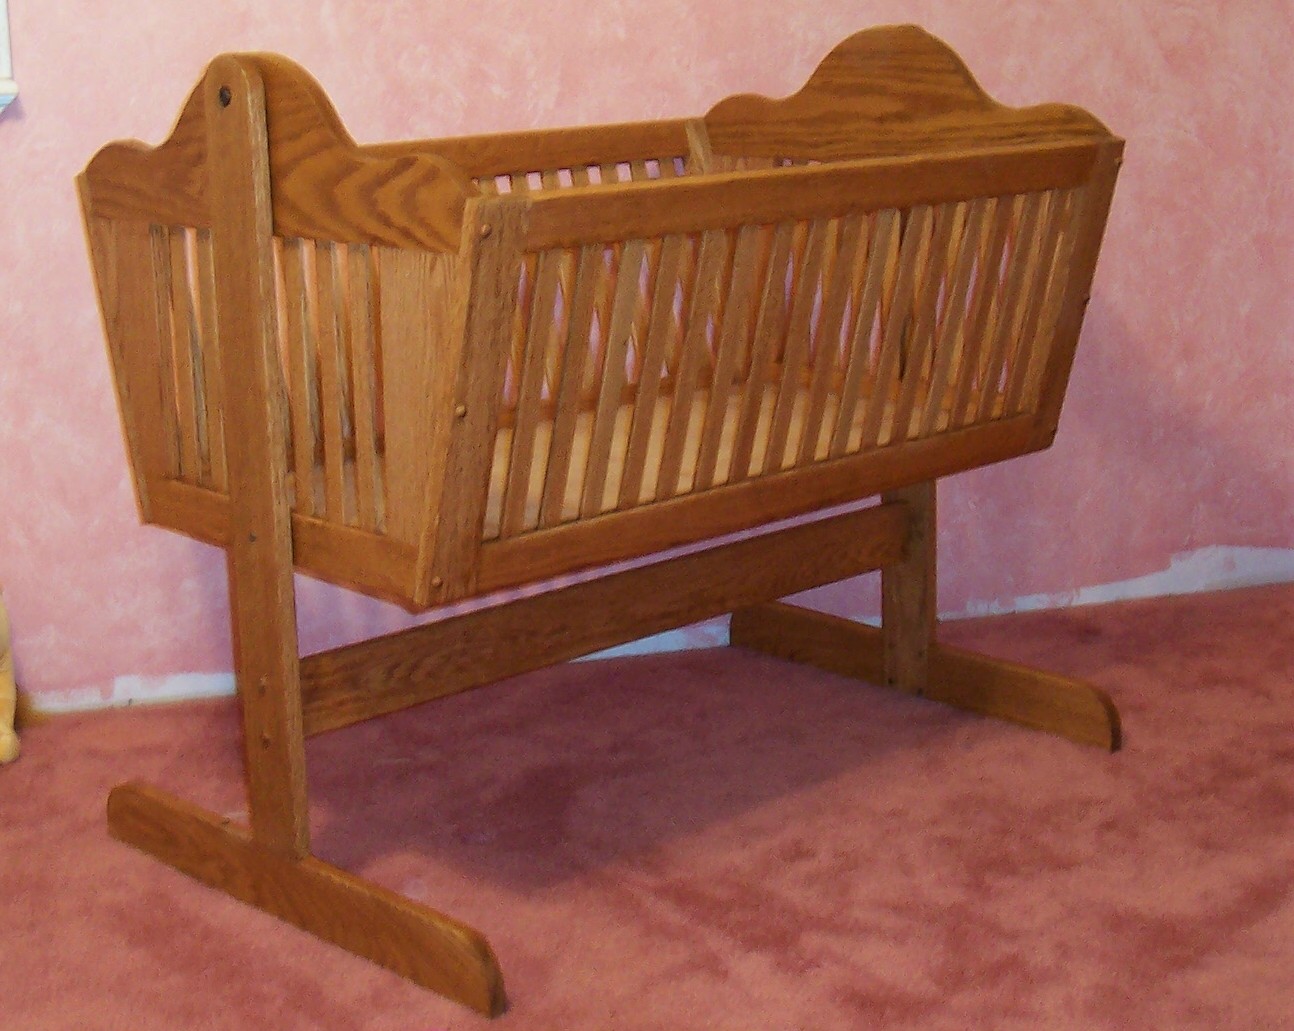 ... Wooden Baby Cradle Plans | How To and DIY Building Plans Online Class